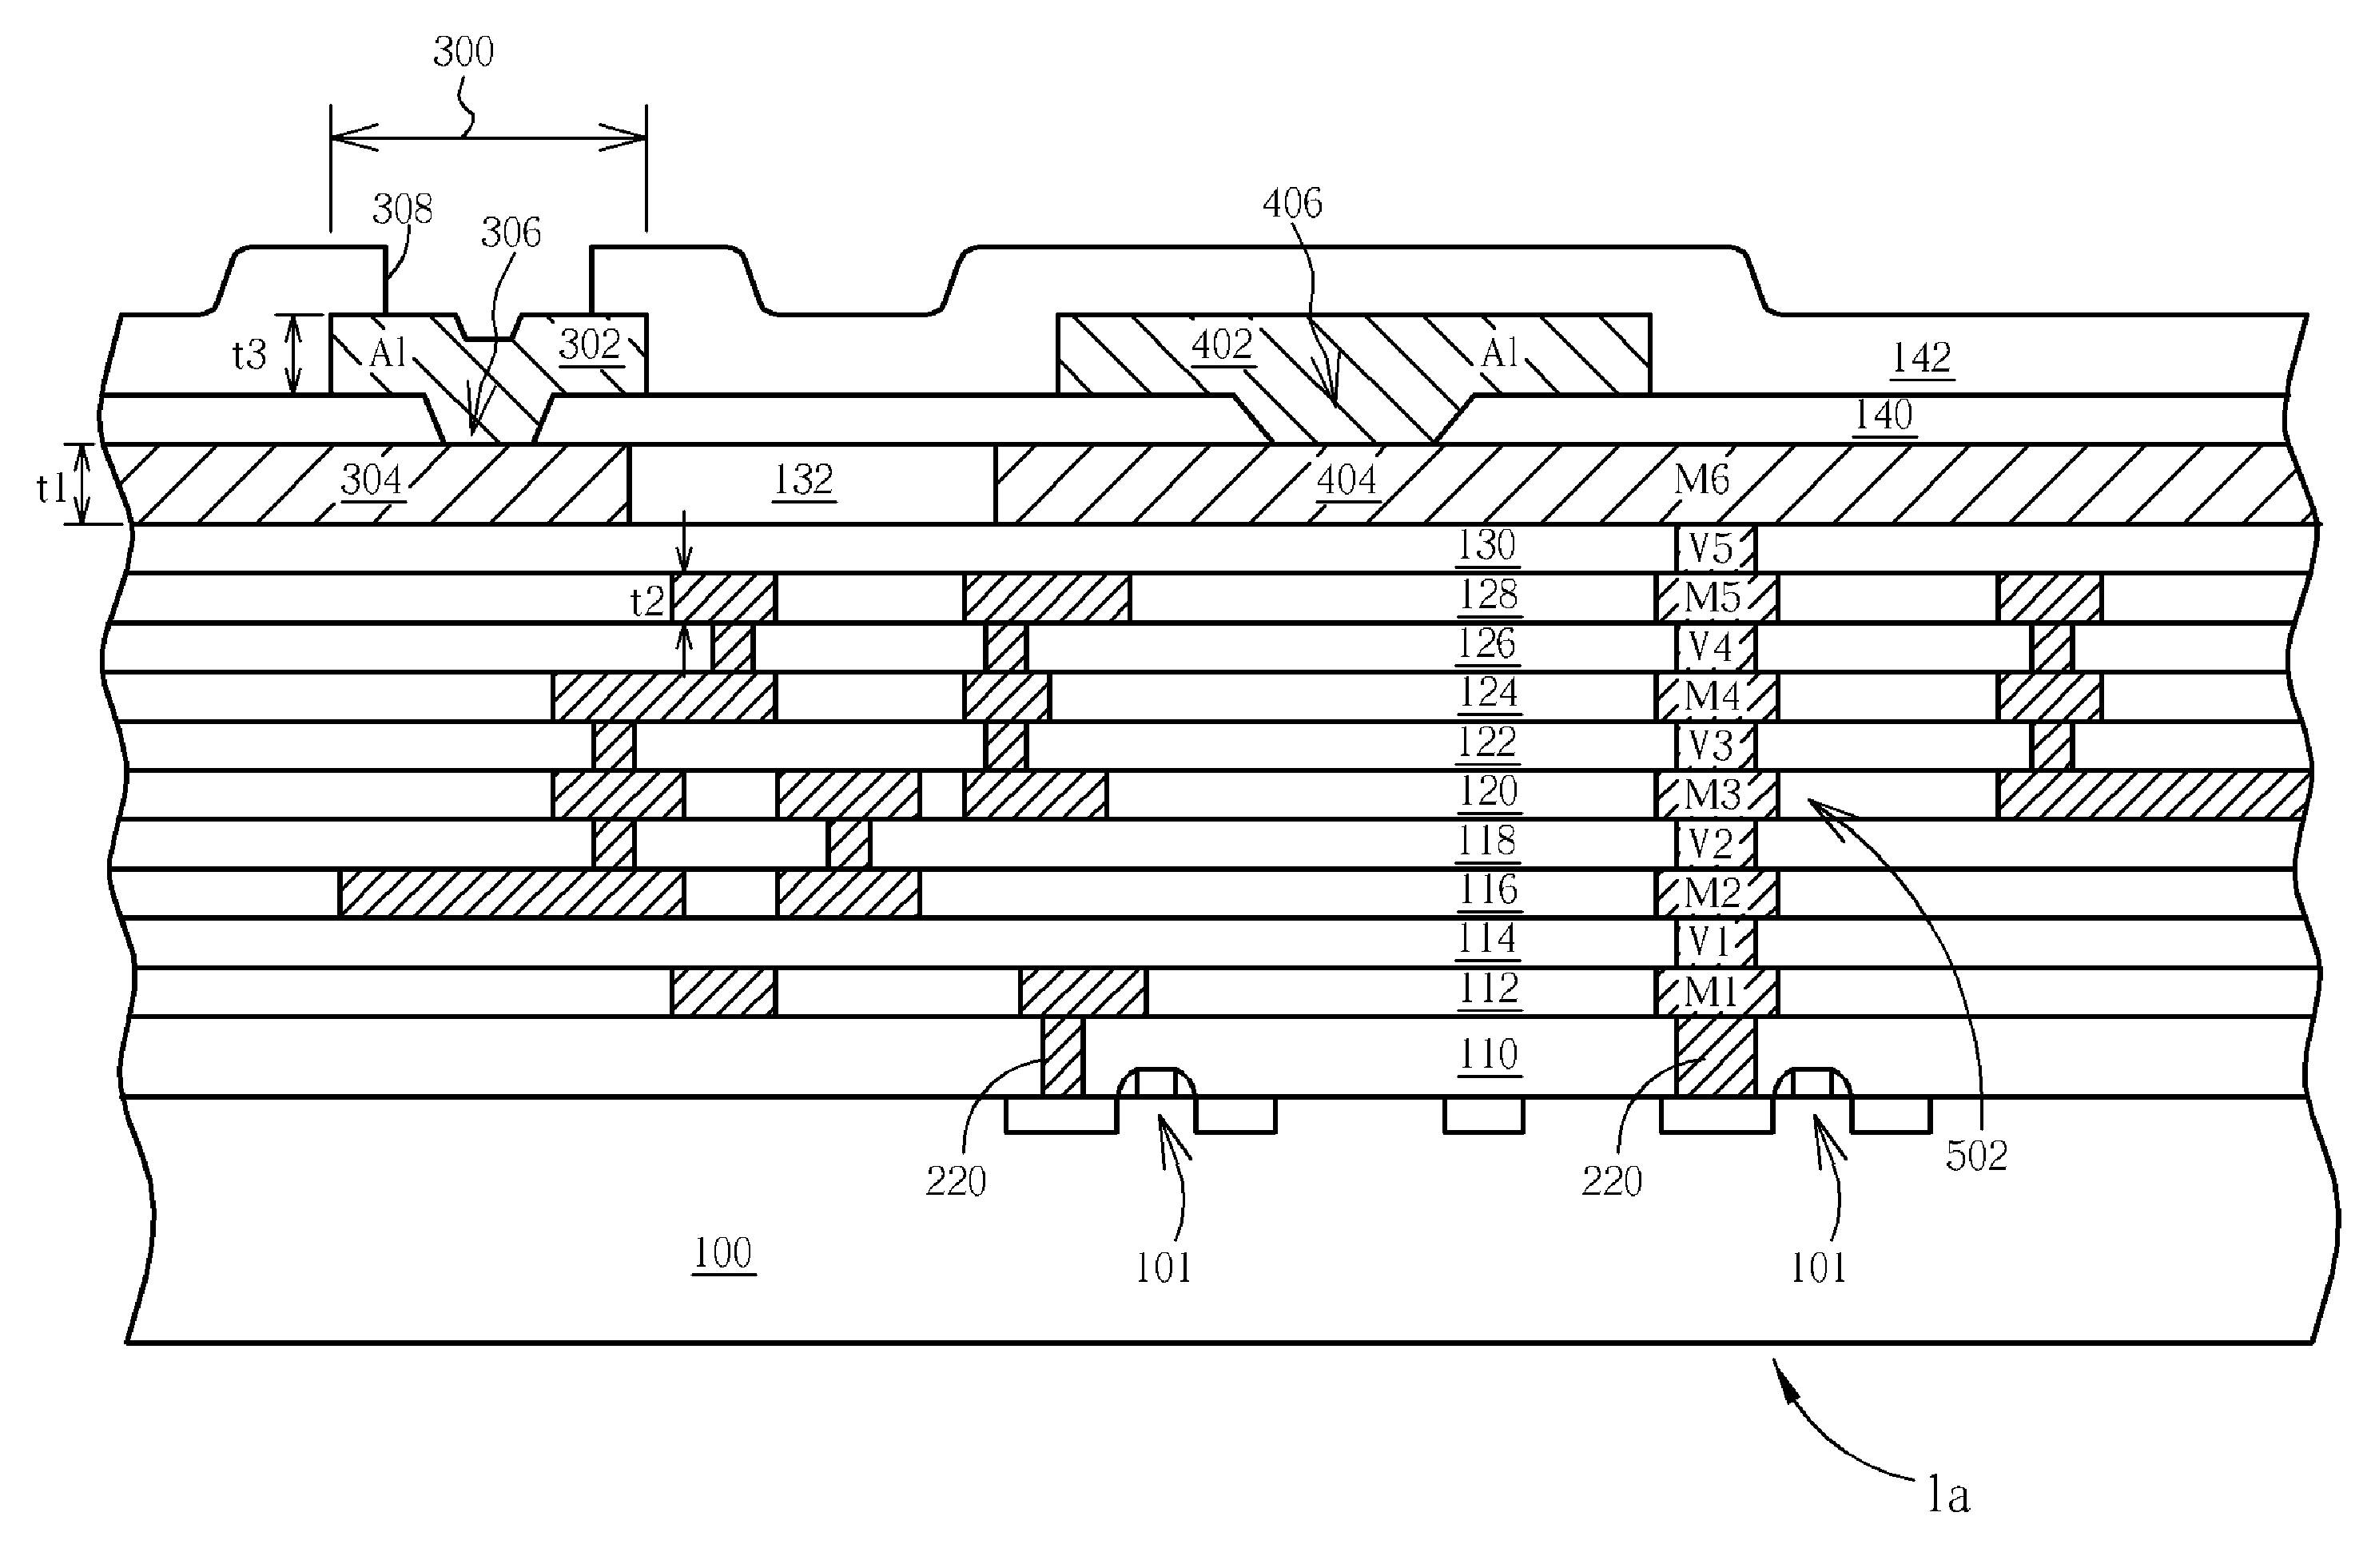 Power and ground routing of integrated circuit devices with improved IR drop and chip performance